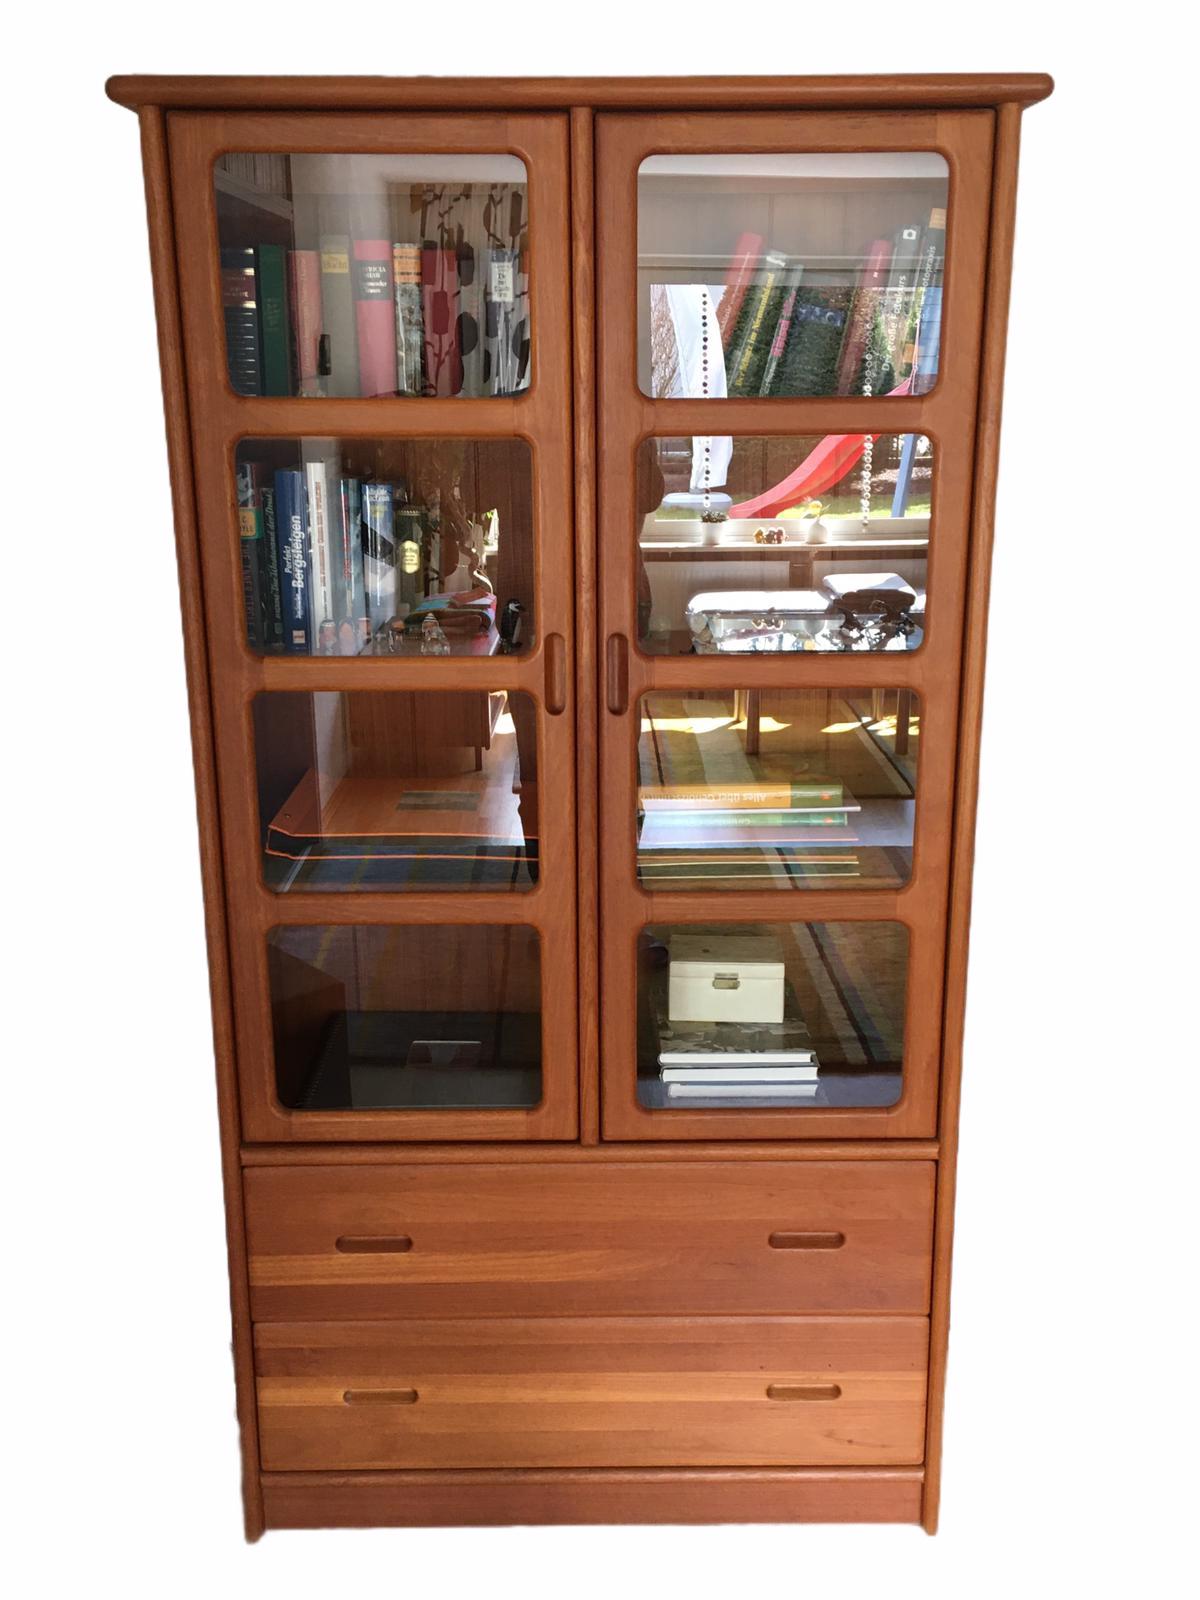 Mid century display/china cabinet, with lights, designed and manufactured by Dyrlund of Denmark. Produced in beautifully grained Teak this piece is another classic example of Dyrlund's Craftsmanship. The sheer quality of the finish is why they were